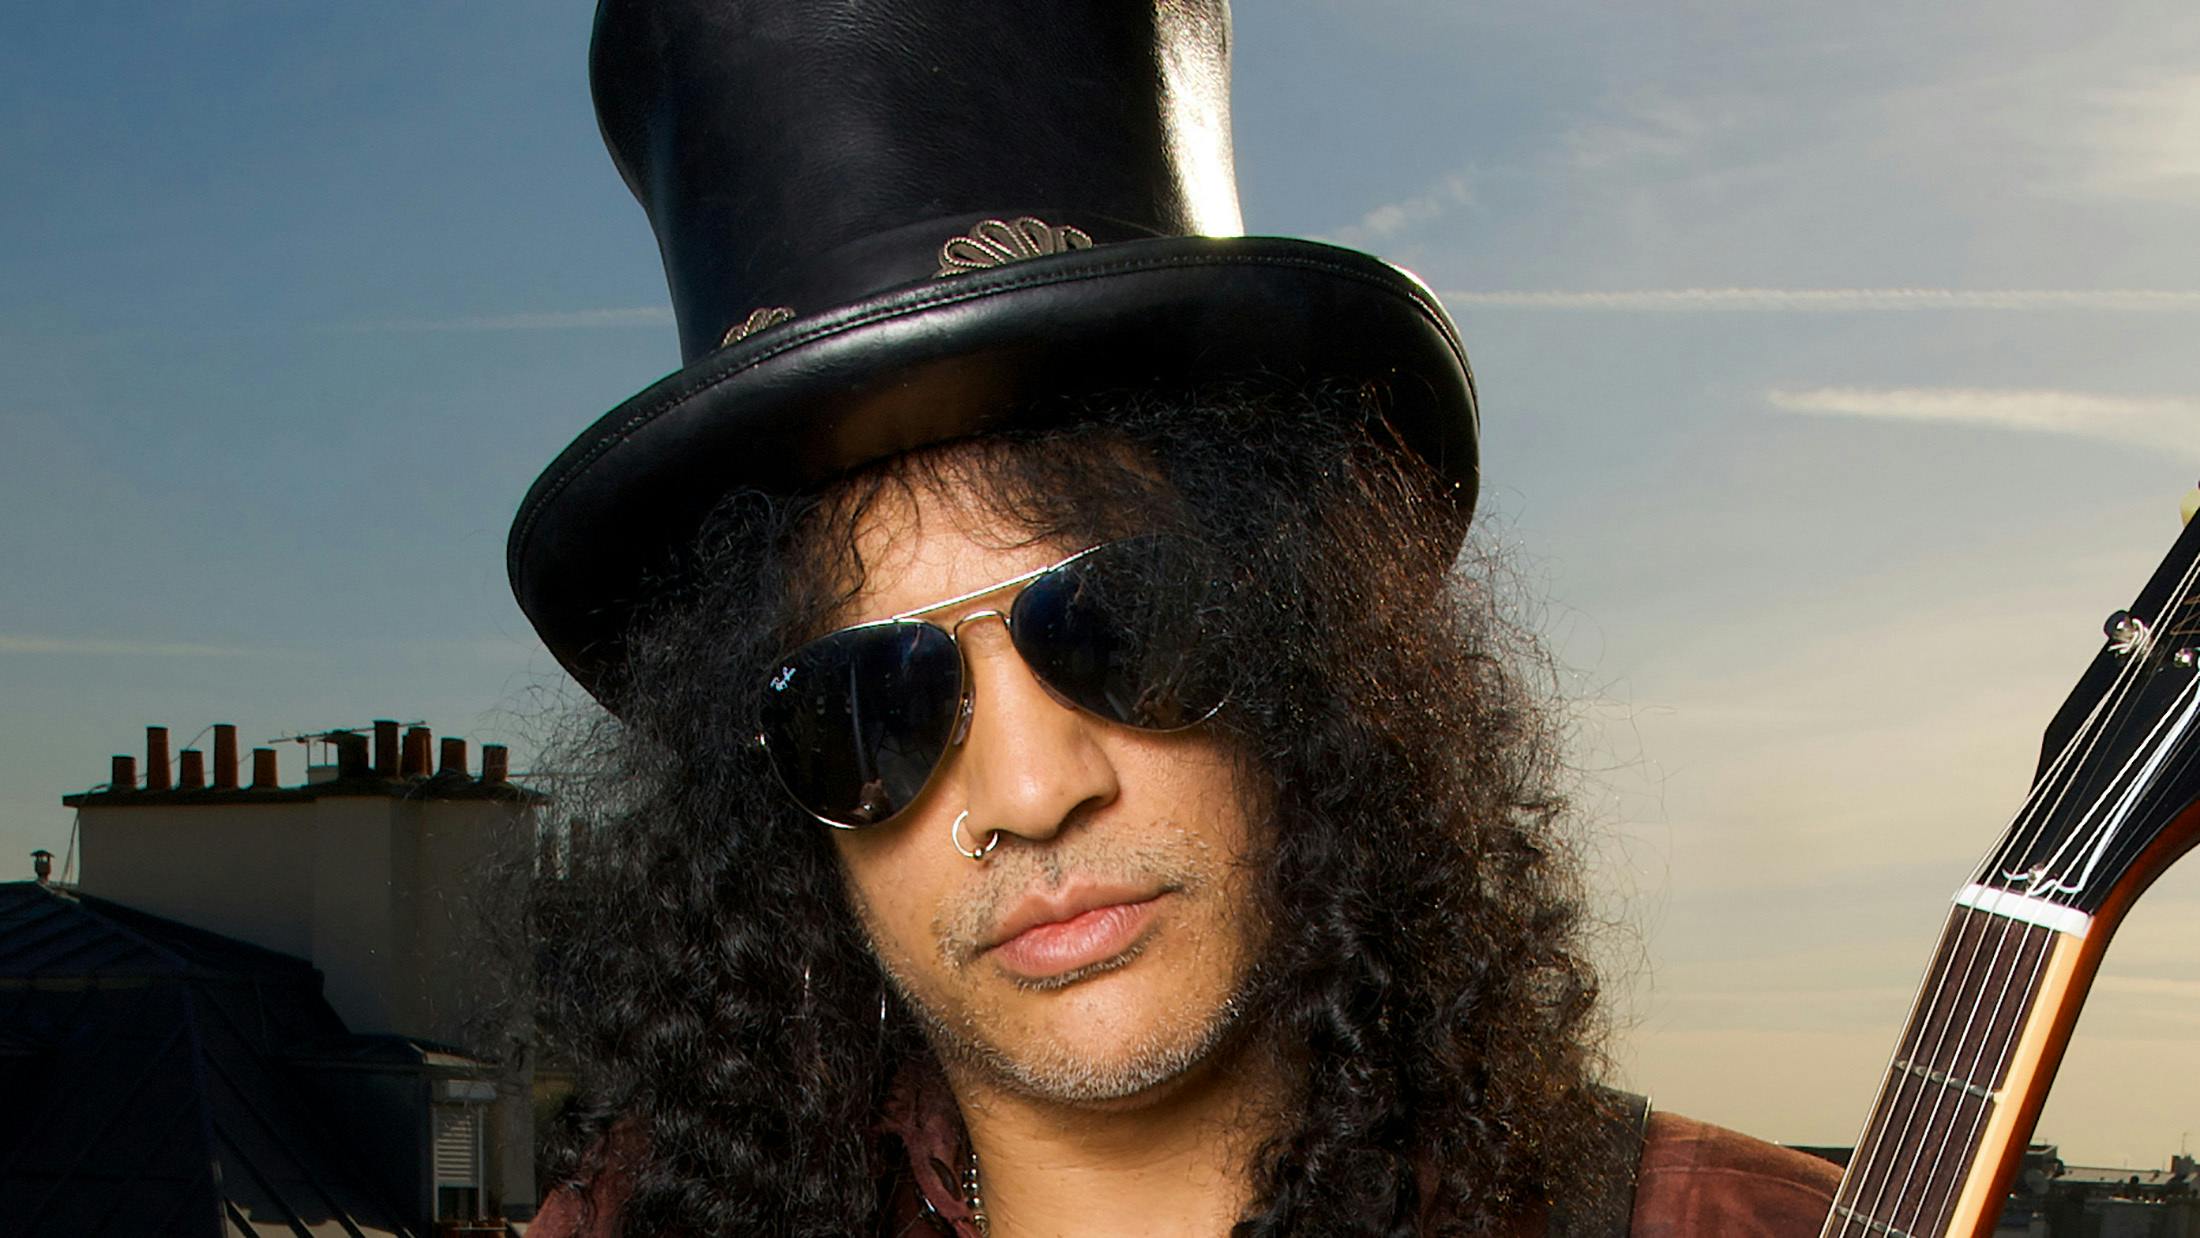 The Marshall Podcast Launches With First Episode Featuring Slash